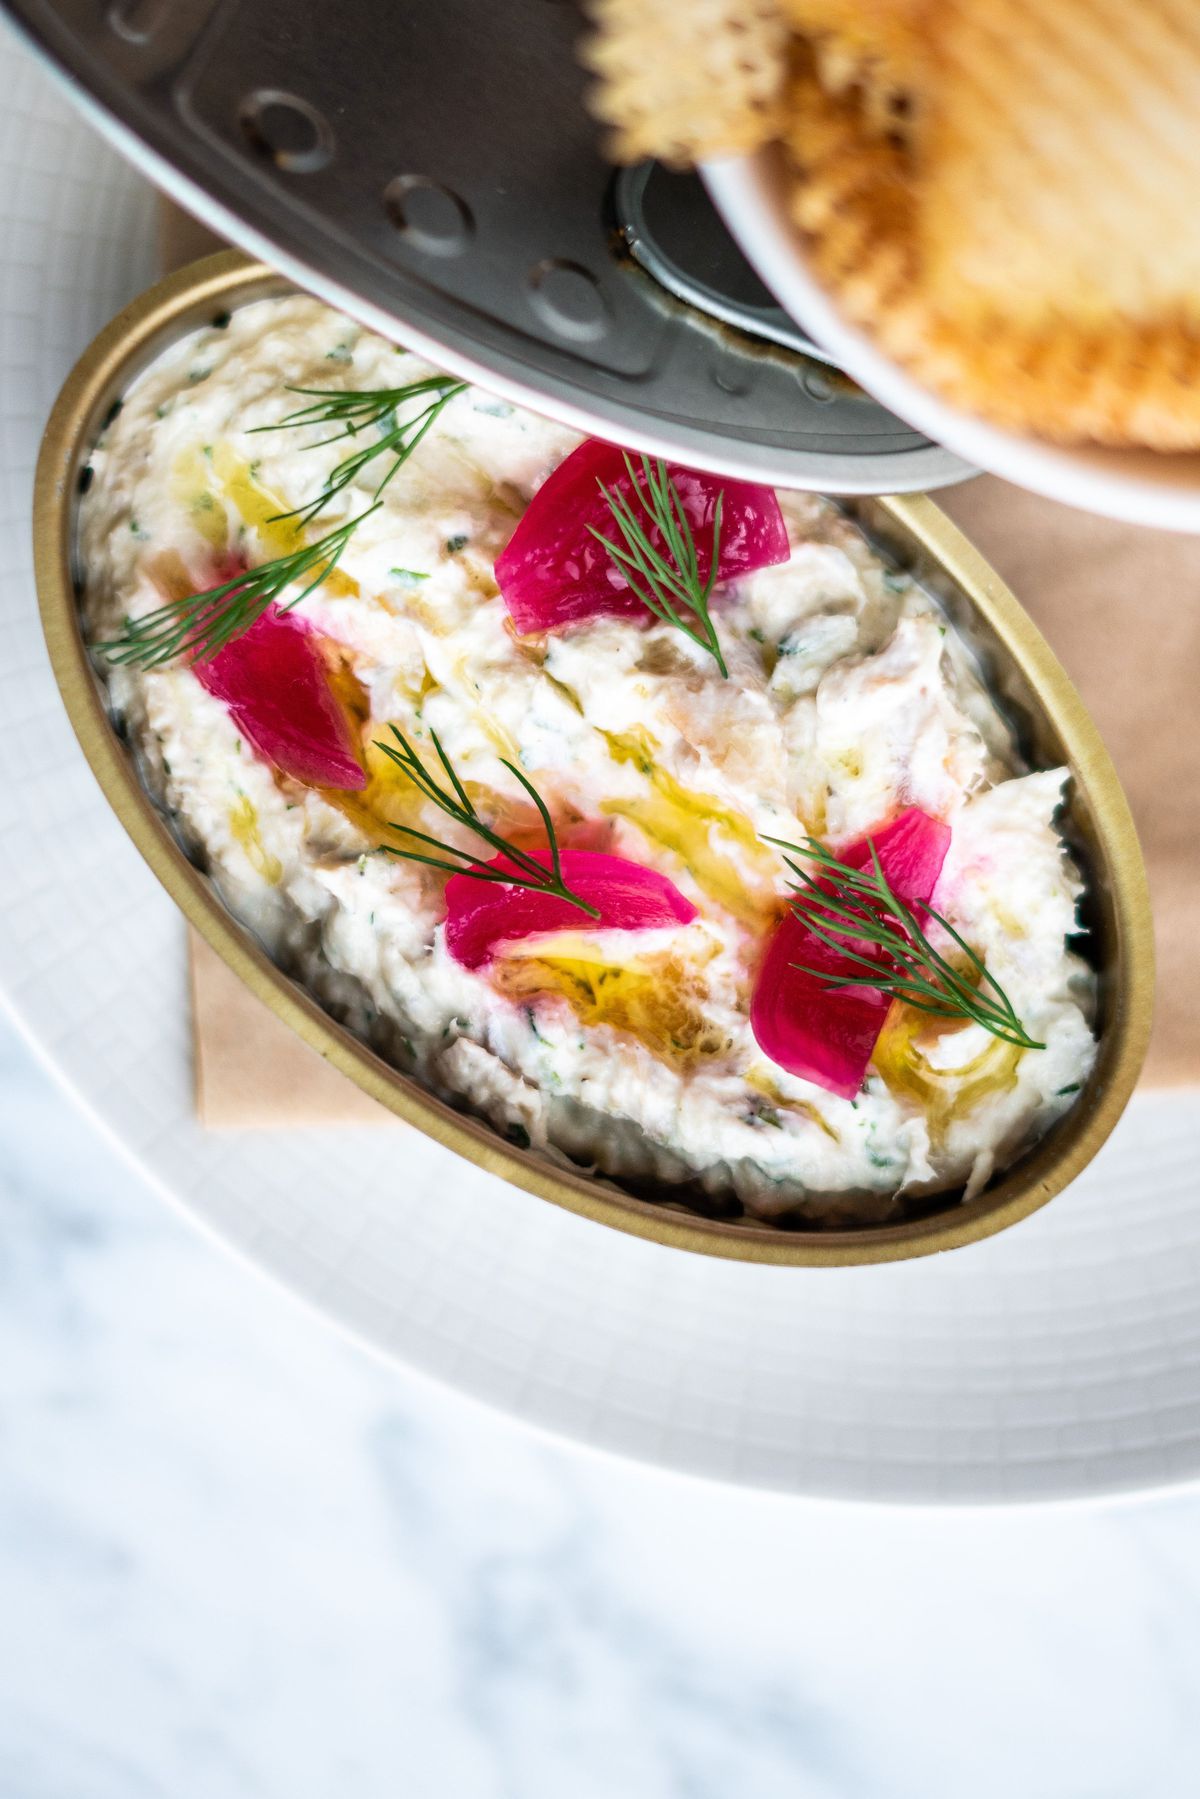 Smoked trout dip with pickled Cippolini onions from Anchovy Social